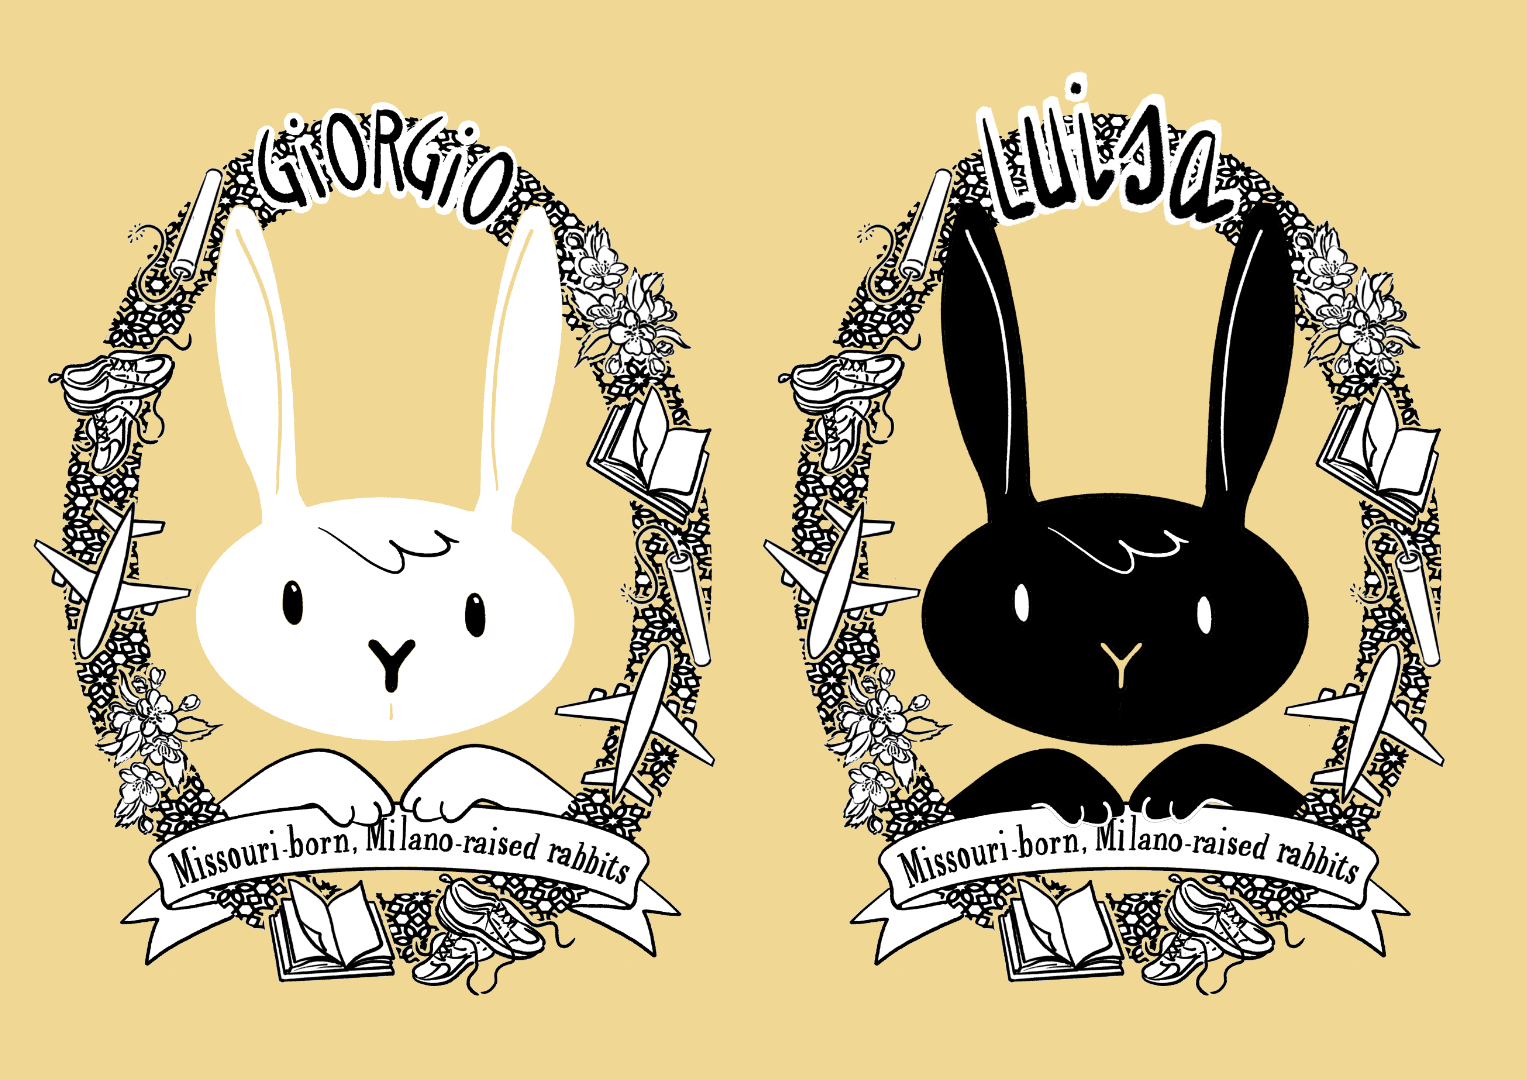 a black and a with rabbit in a flowery garland with their names on top (giorgio and luisa) and a with a ribbon with the words "Missouri-born, Milano-raised rabbits" on a pastel yellow background